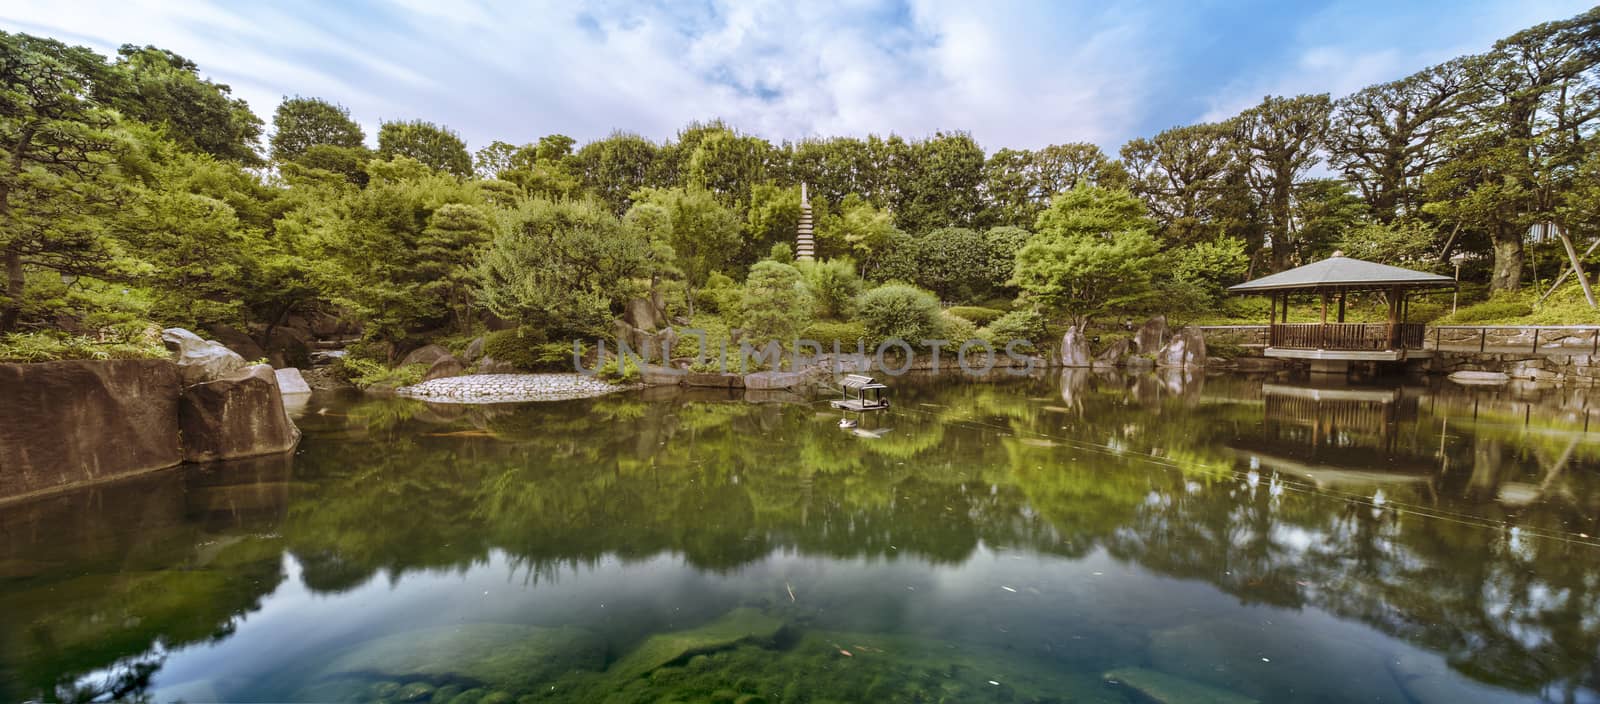 Central pond of Mejiro Garden which is surrounded by large flat stones under the foliage of the momiji maple trees and pines. The sky is reflected symetrically in the water of the pond.